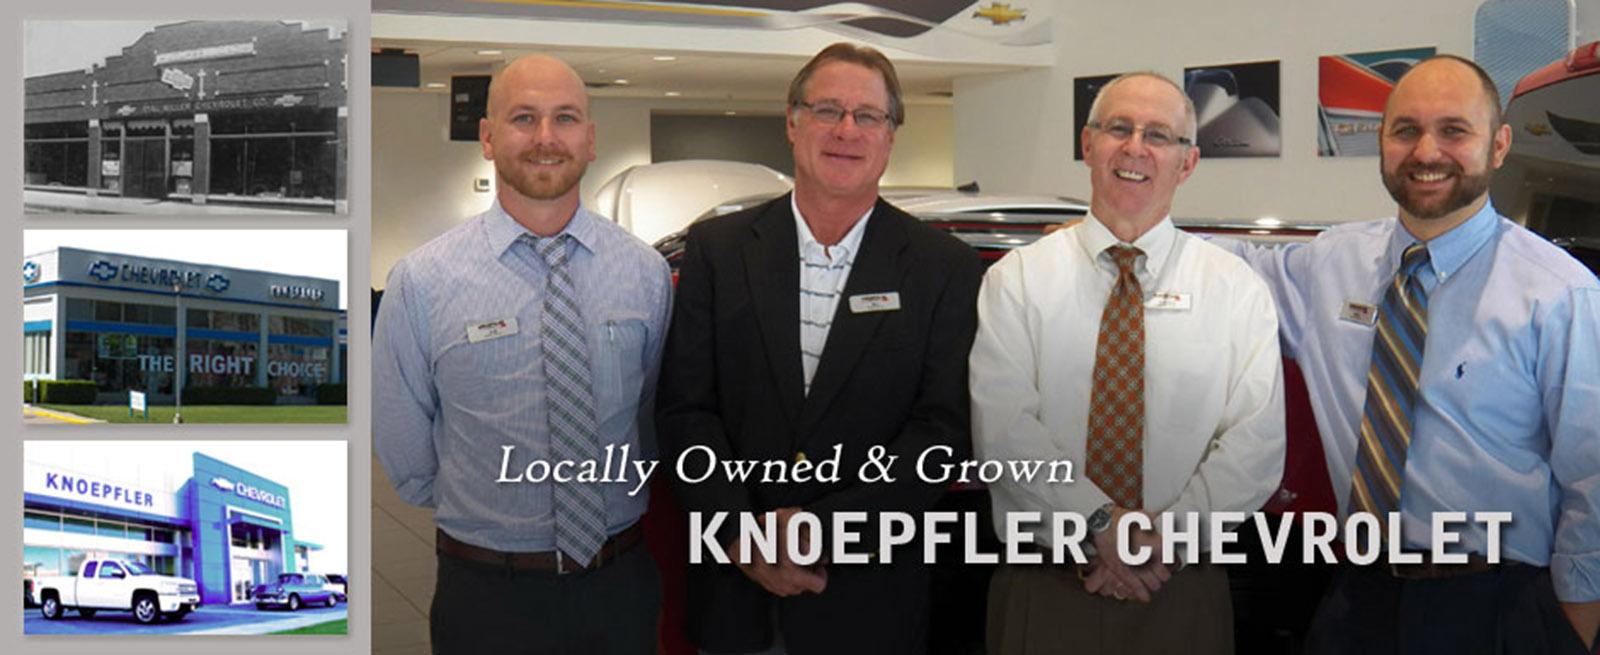 locally Owned & Grown Knoepfler Chevrolet